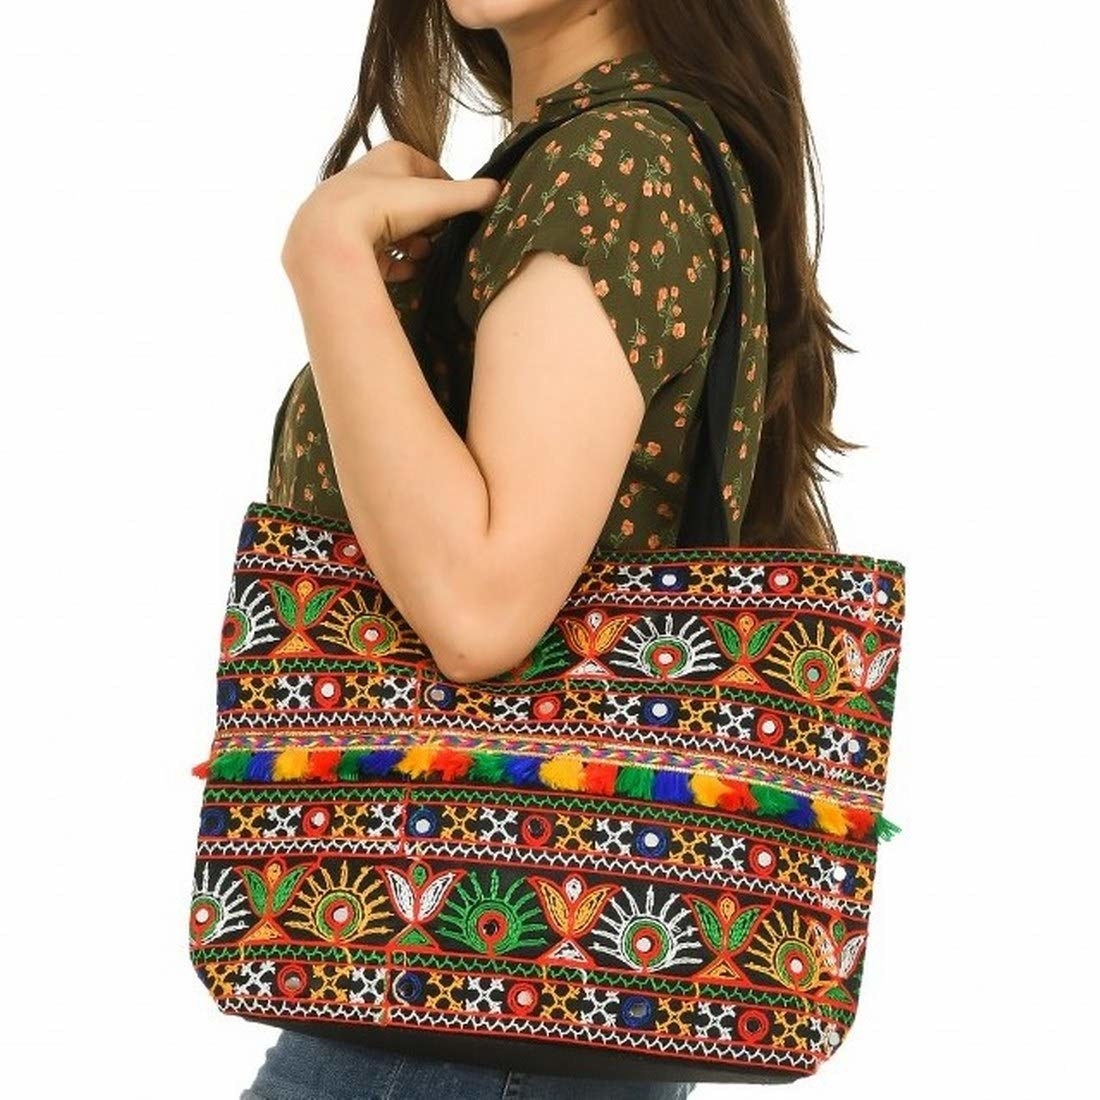 A multi-coloured Rajasthani-style handbag with embroidery and mirrors sewn on it